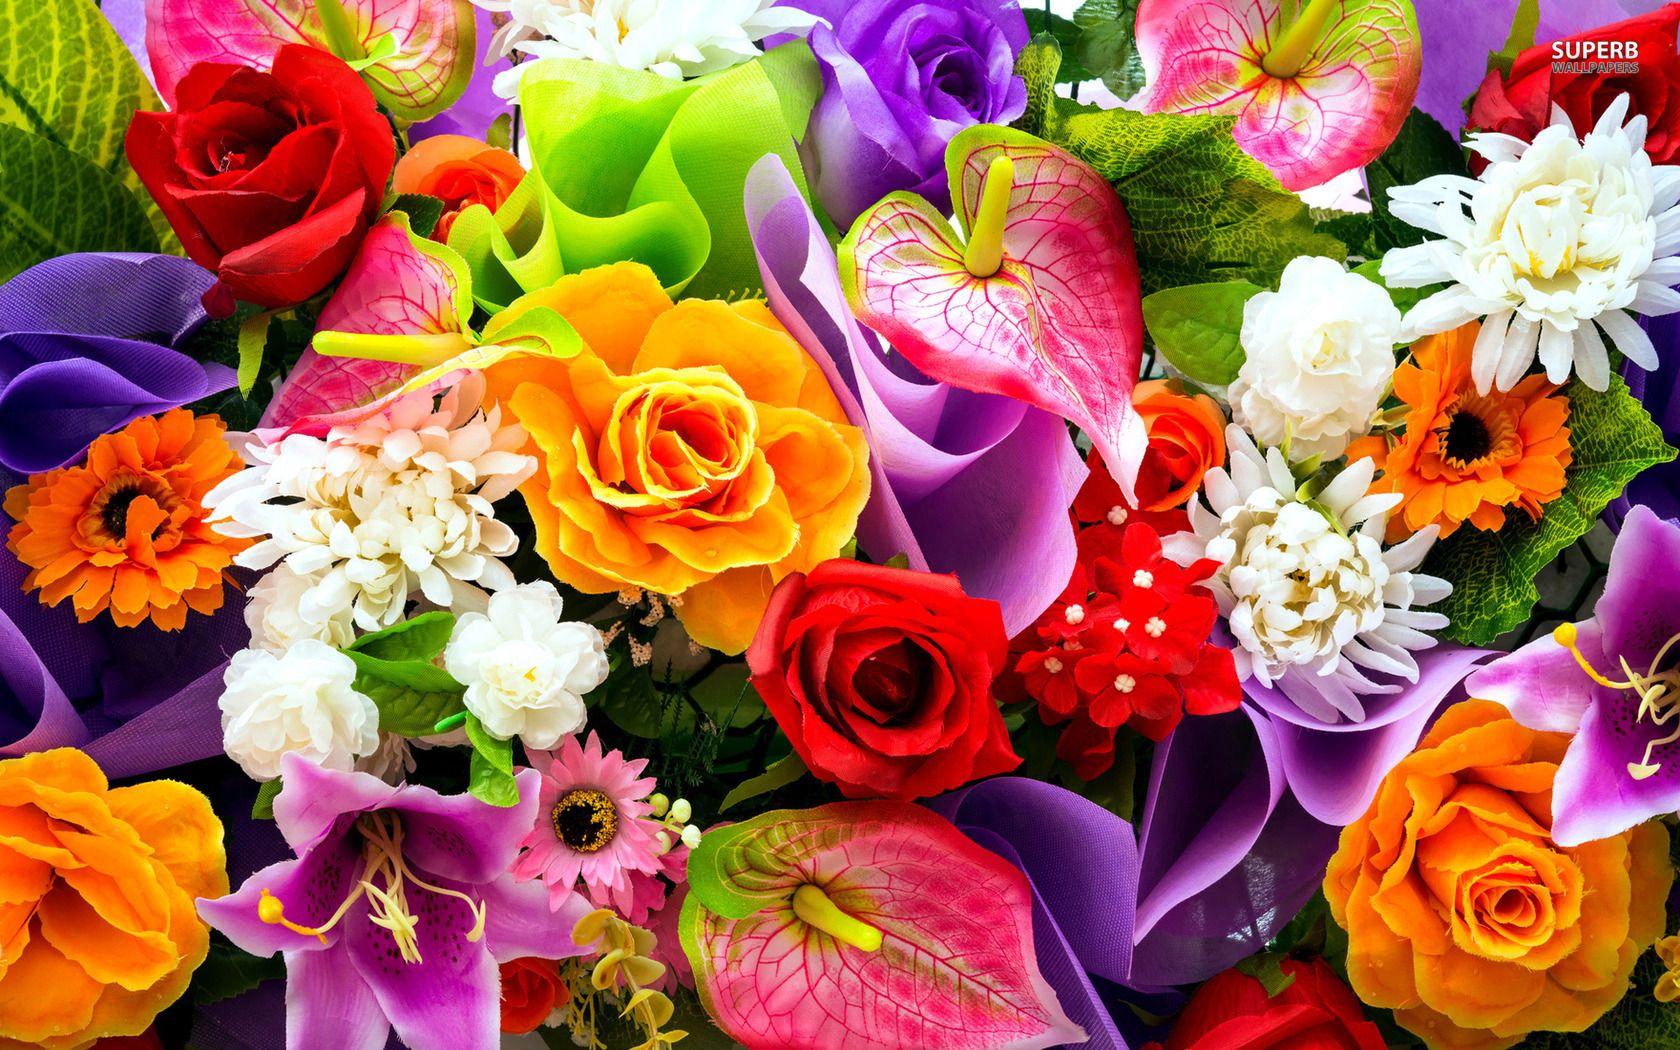 Red flowers image wallpaper are very beautiful and heart